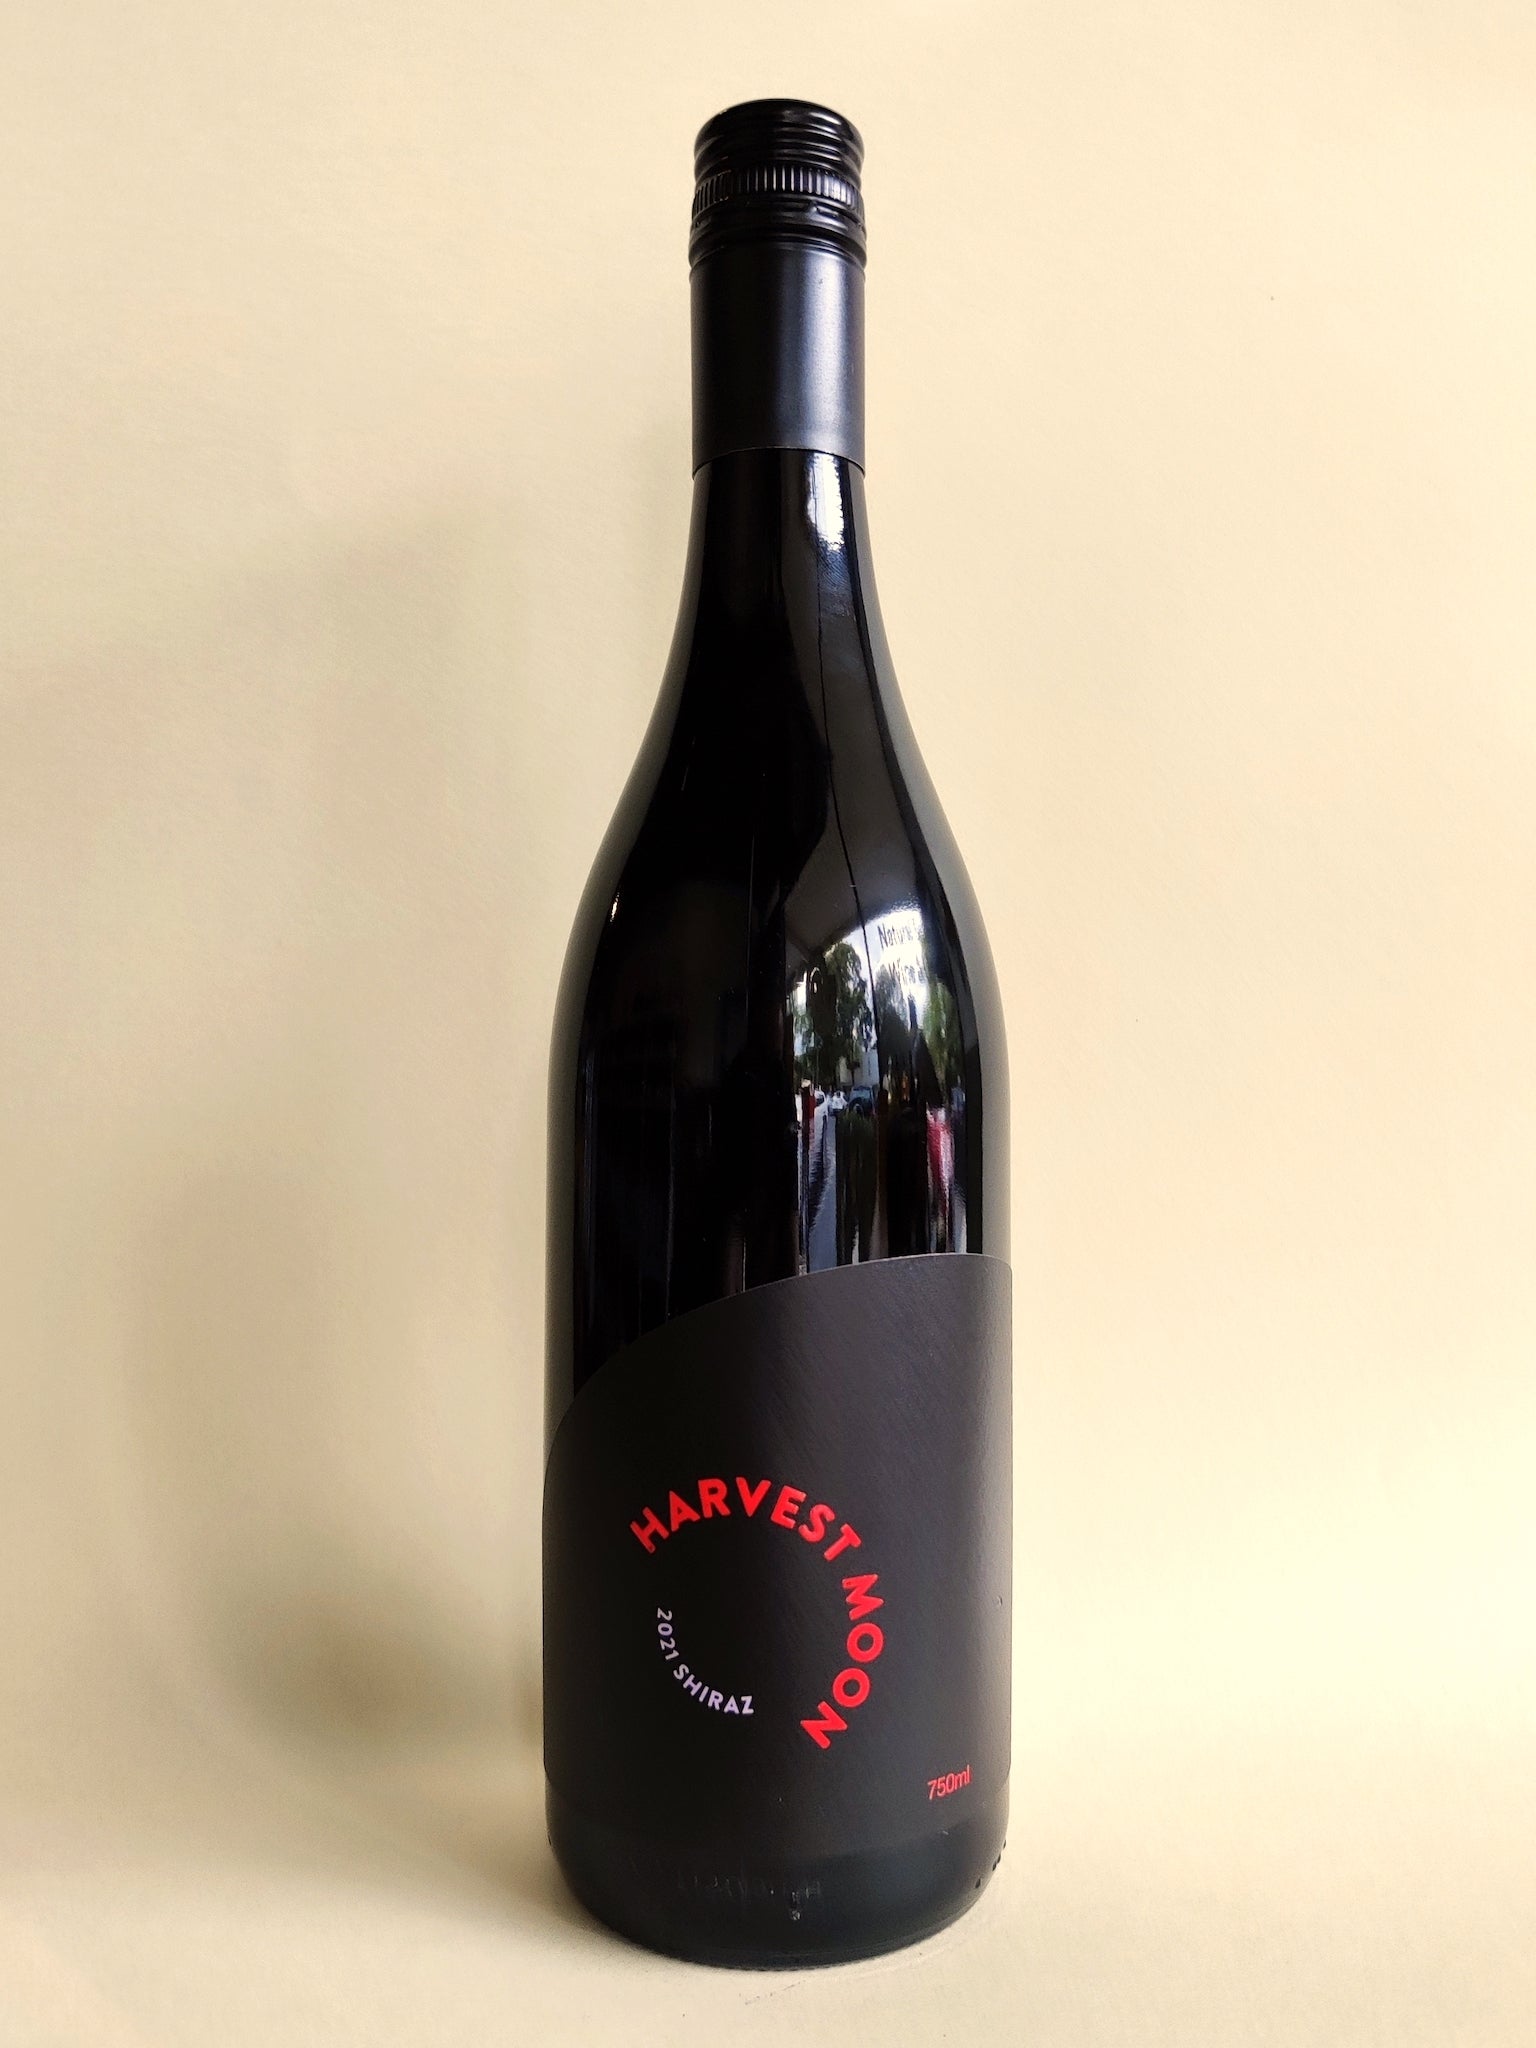 A bottle of Harvest Moon Shiraz from Central Victoria. 